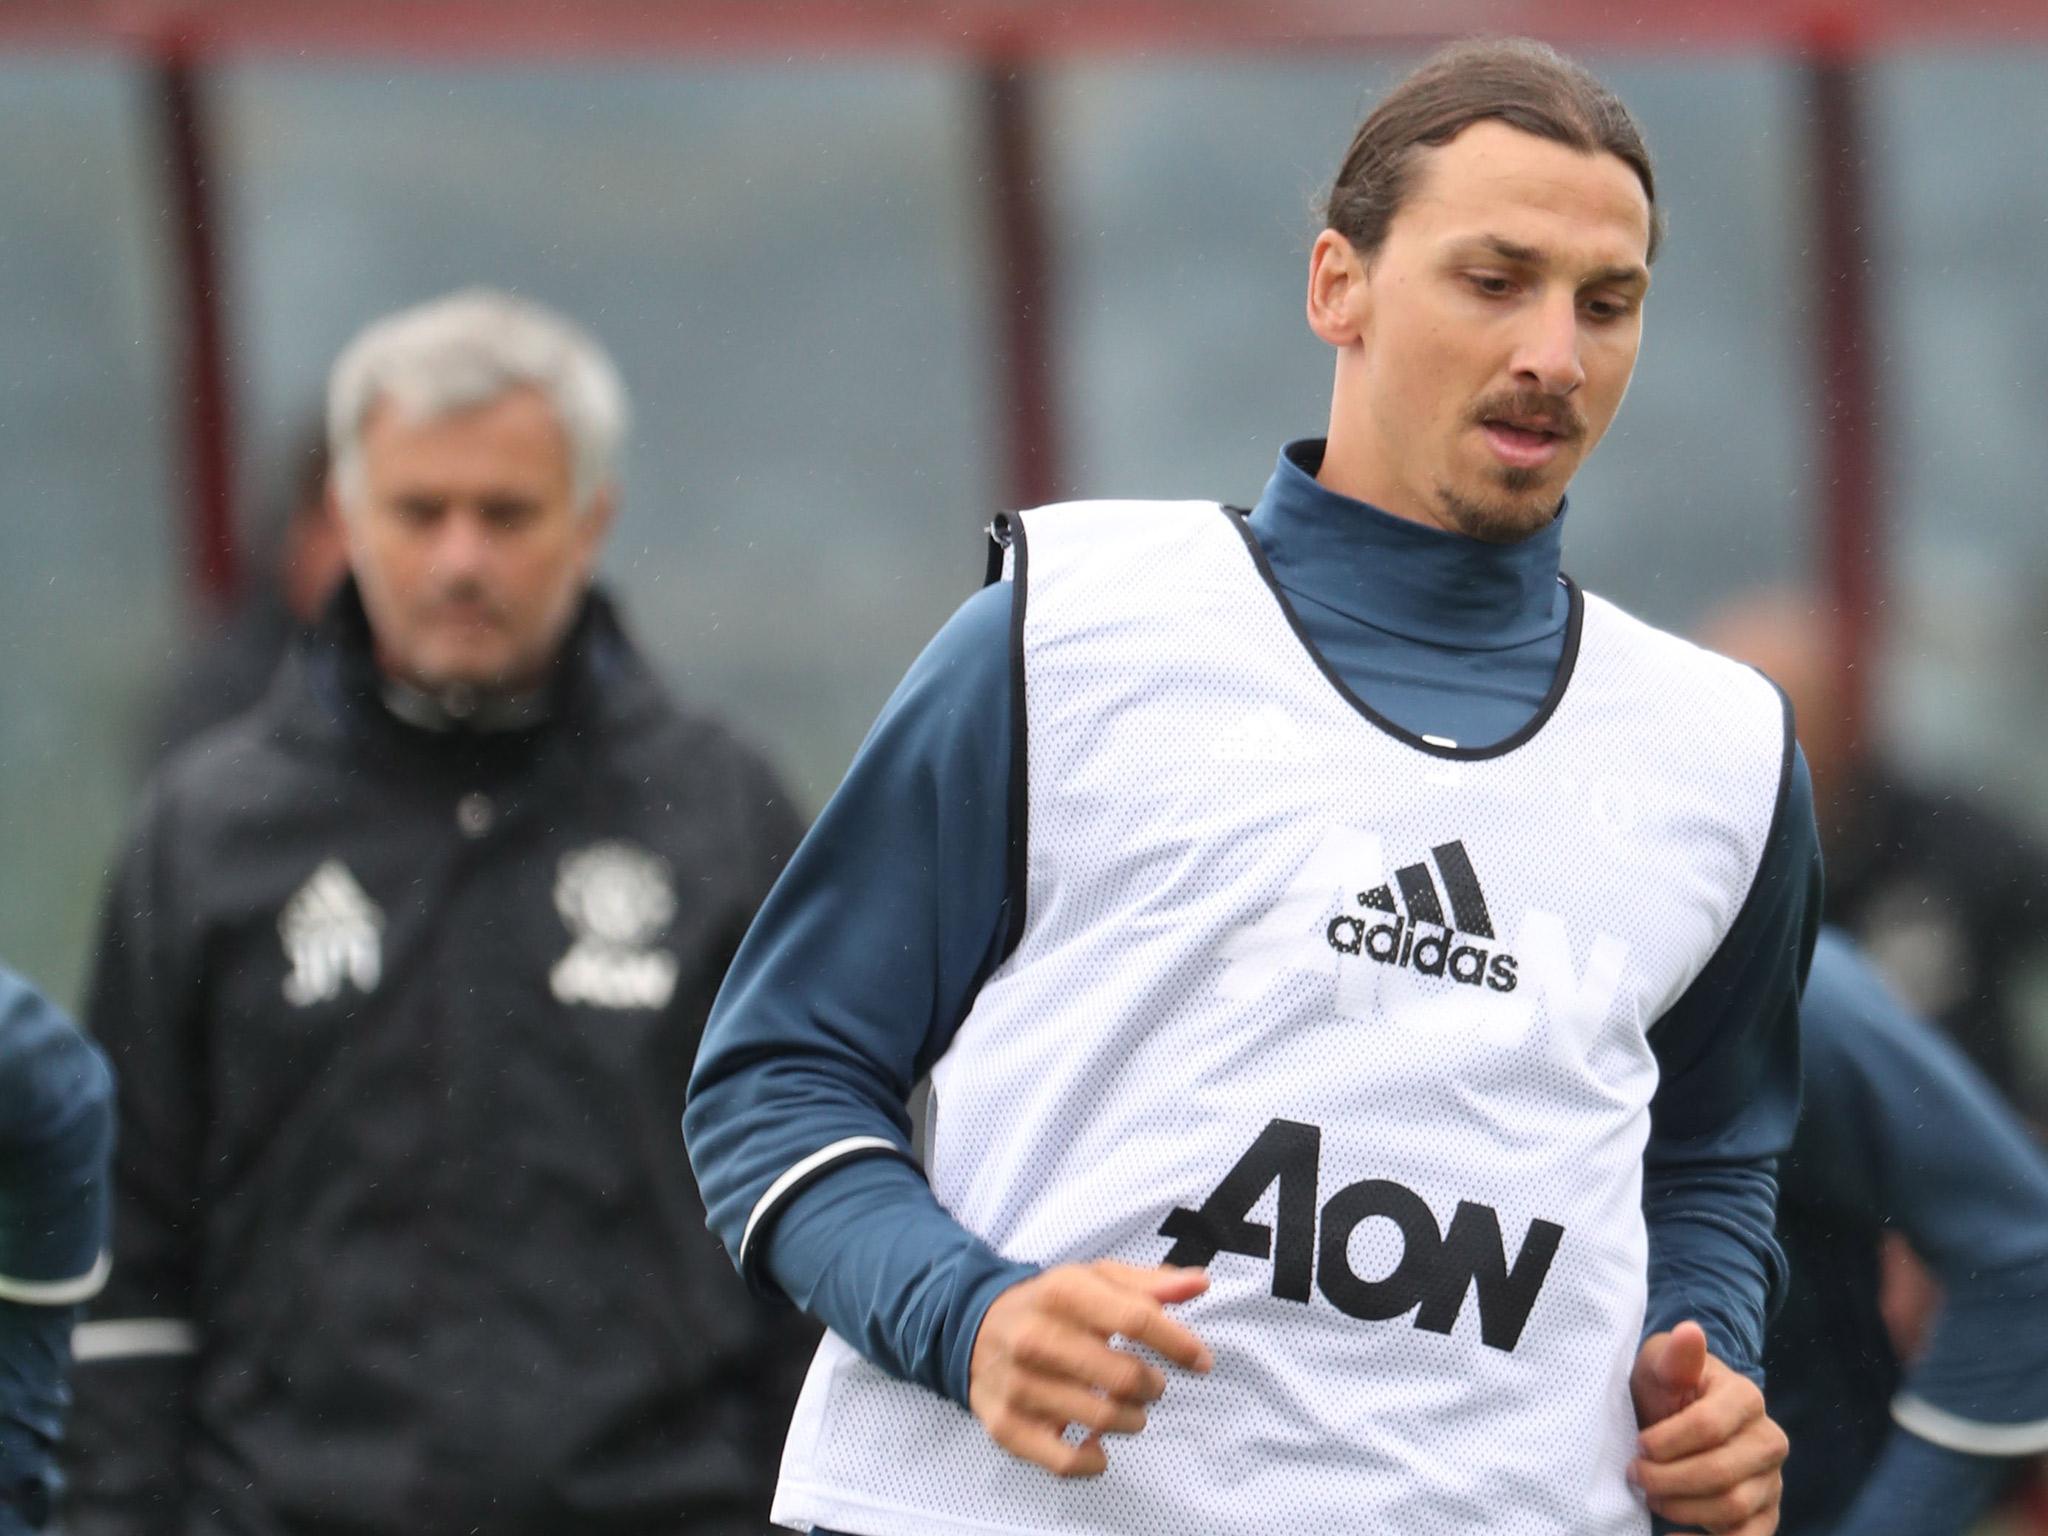 Zlatan Ibrahimovic has been backed by Jose Mourinho to end his Manchester United goal drought